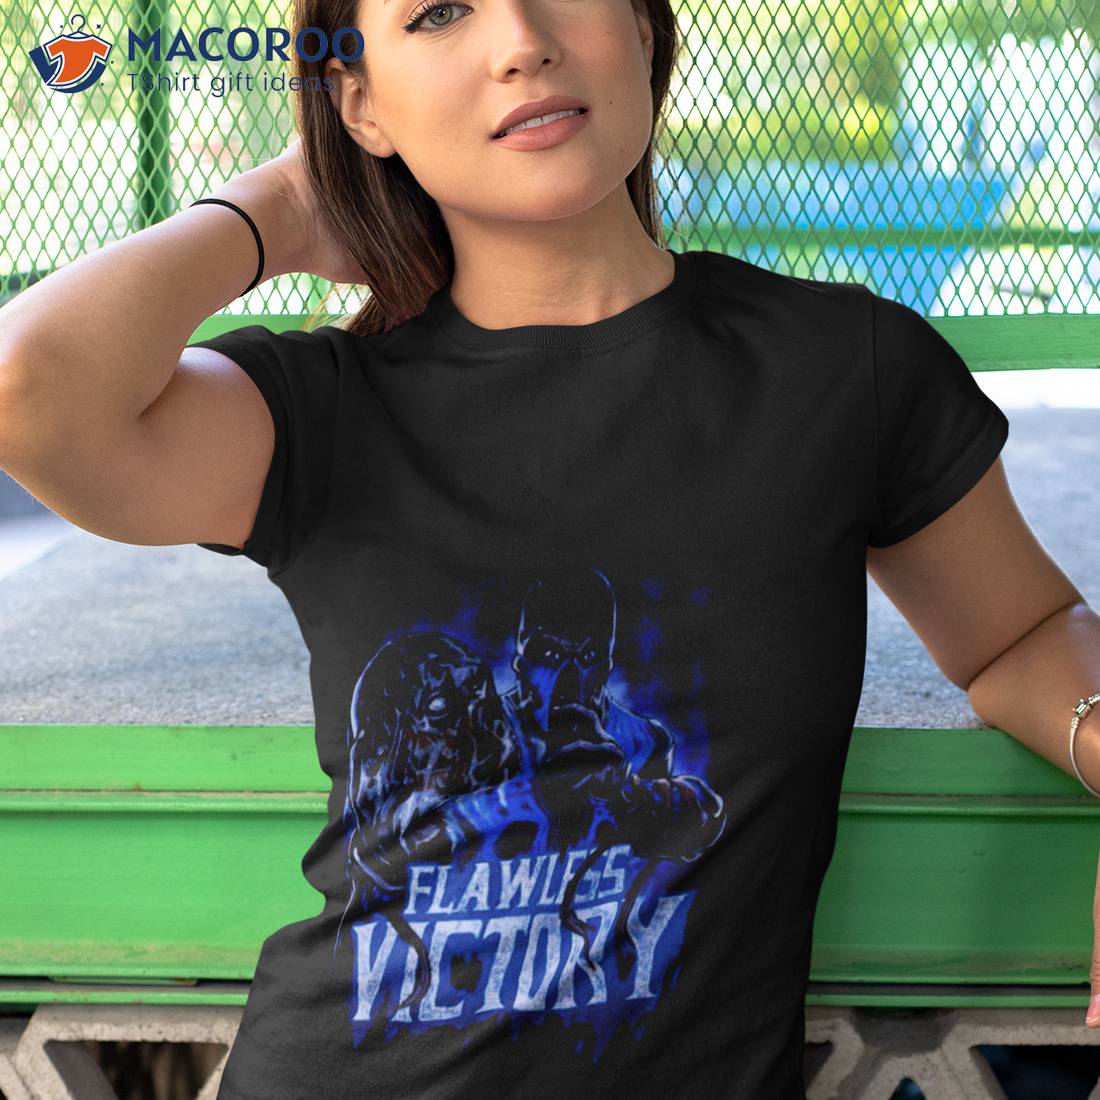 Flawless Victory T-Shirt